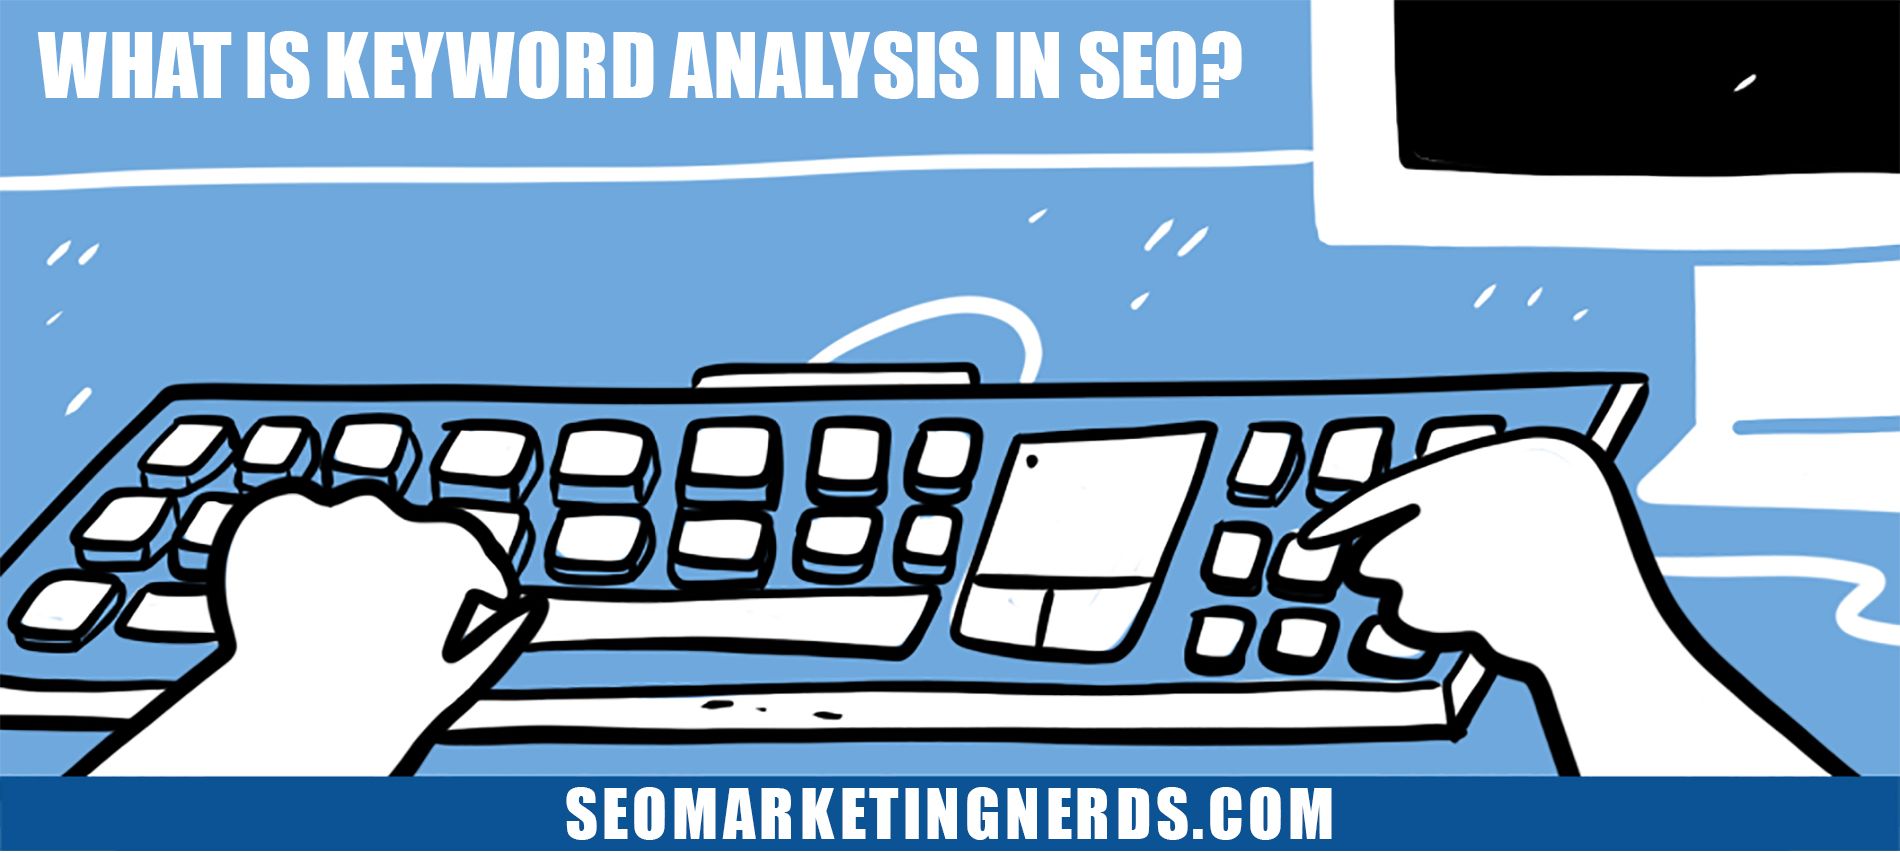 What is keyword analysis in SEO?